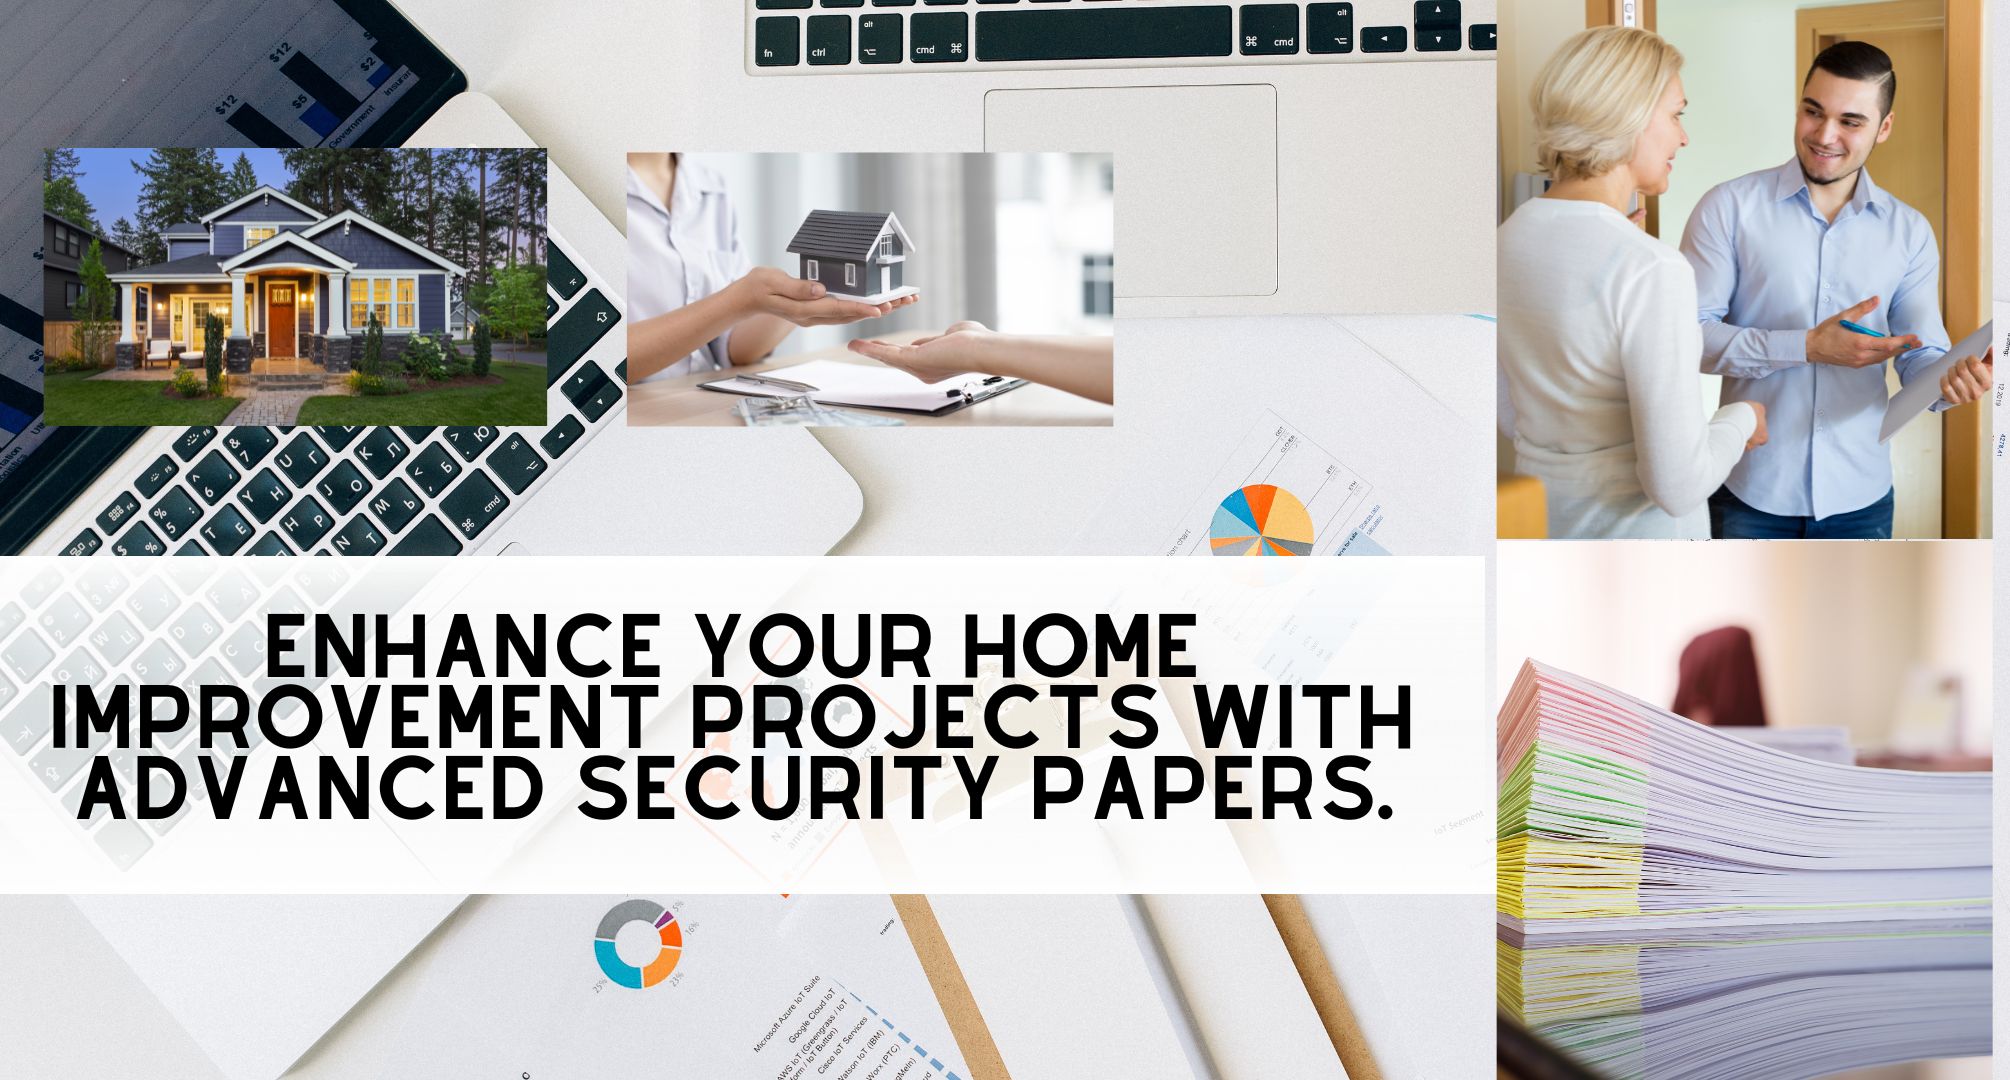 Security Papers Elevating Home Improvement and Redefining Safety